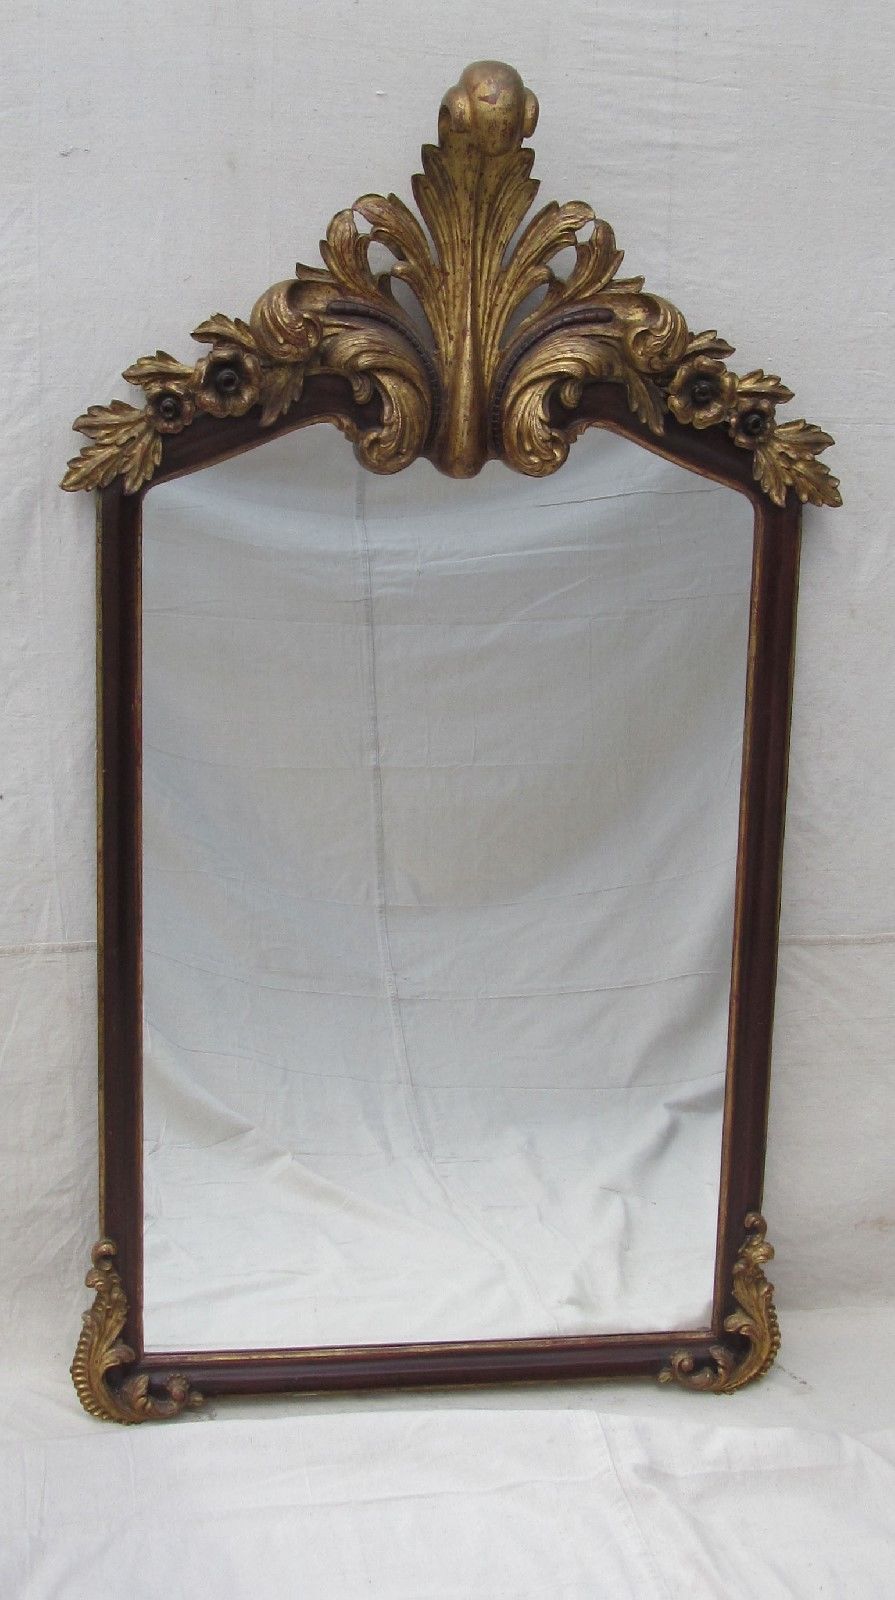 VICTORIAN ROCOCO STYLE ROSEWOOD MIRROR WITH GOLD GILT FLORAL CREST - 62